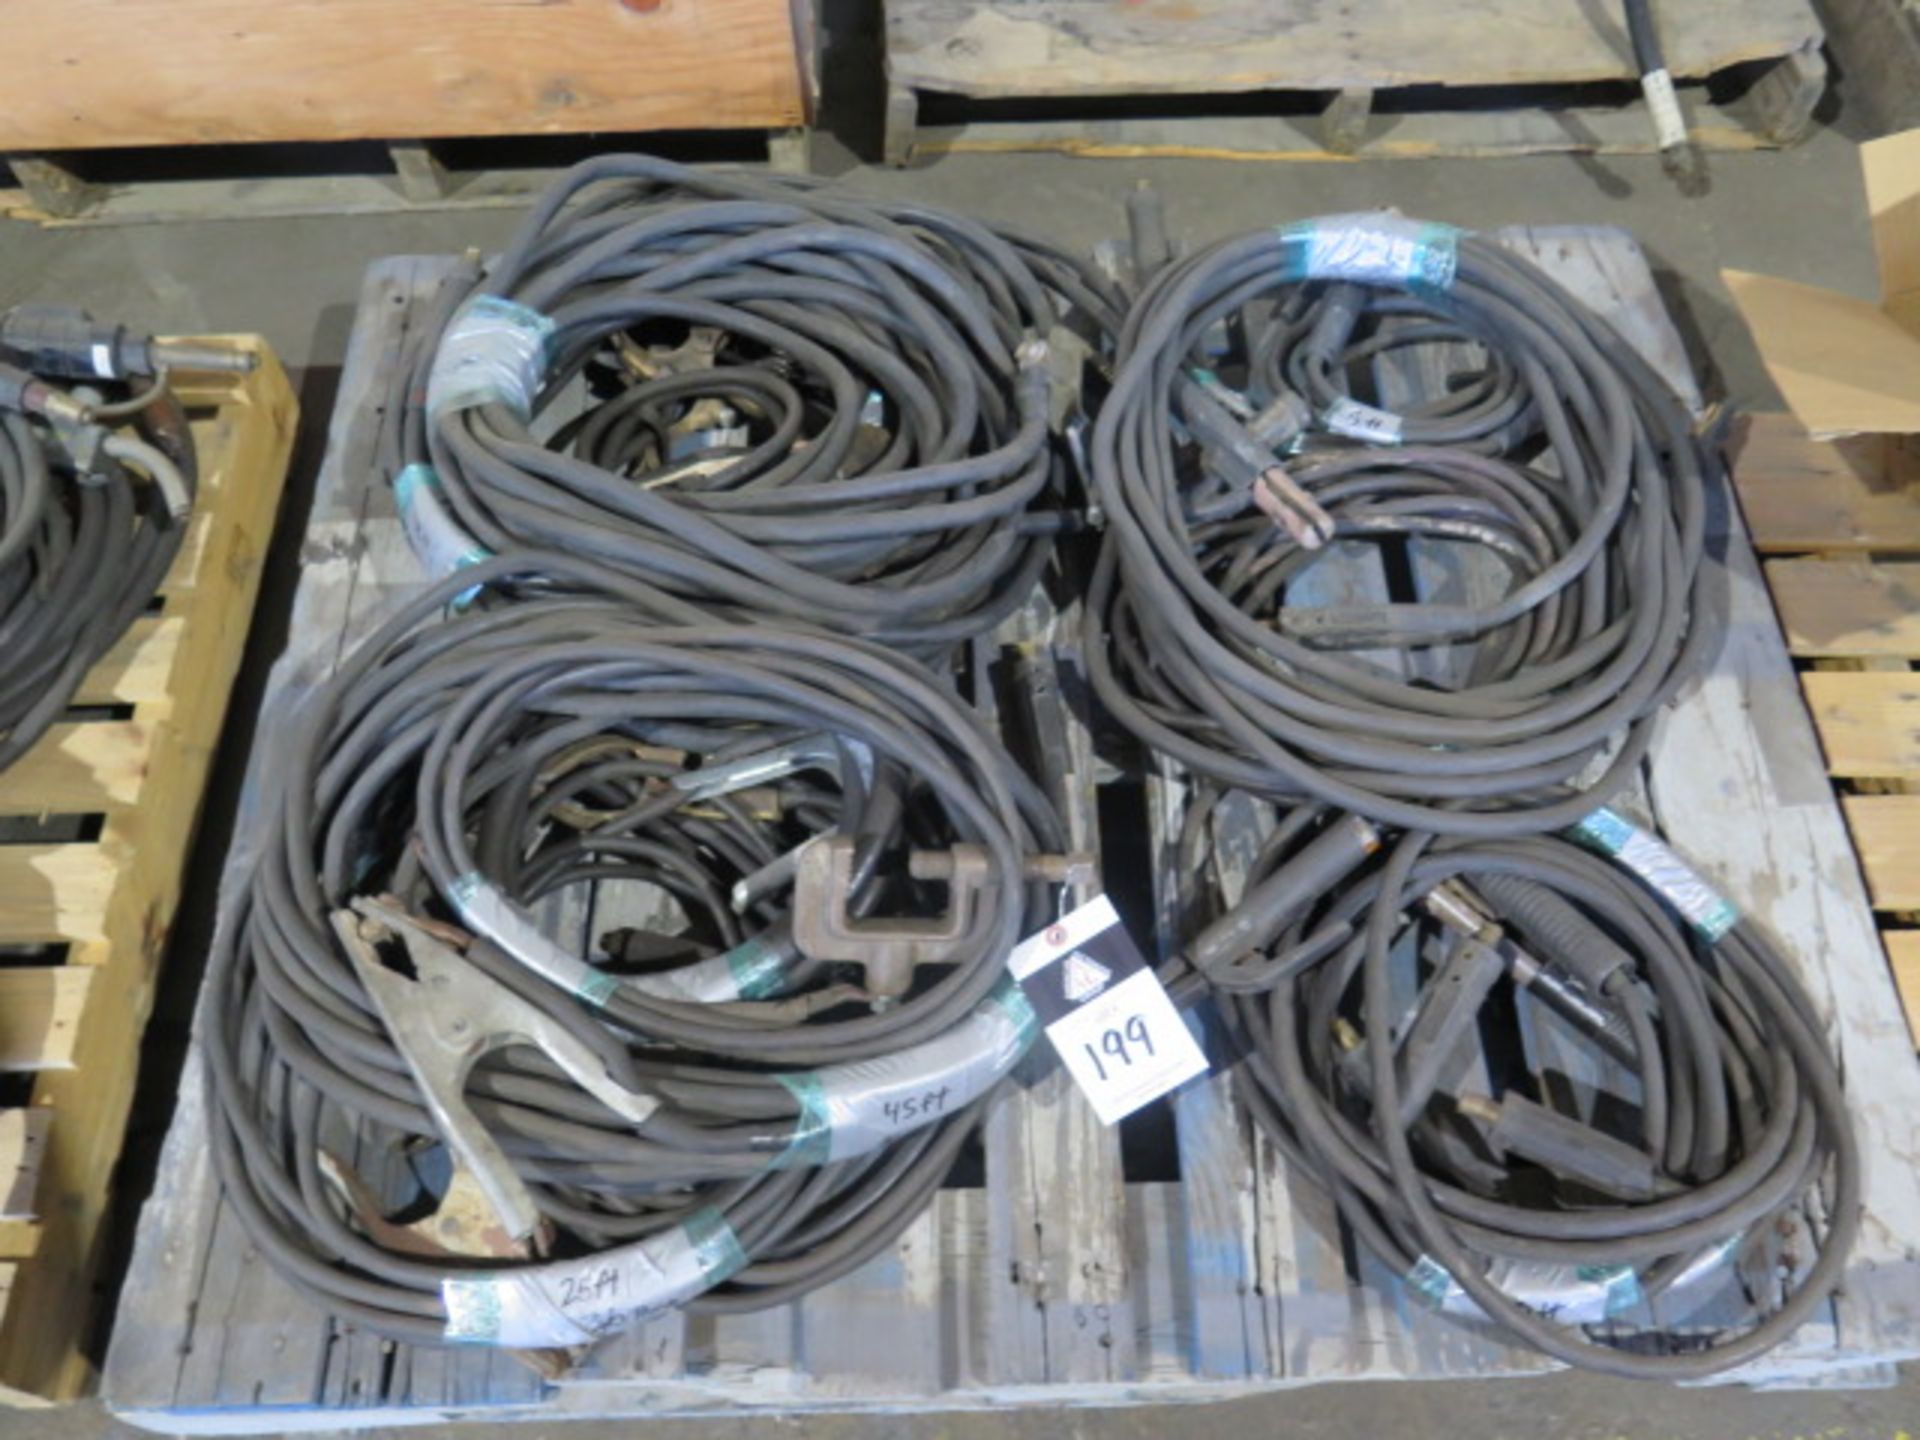 Welding 200 Volt Heavy Duty Welding Leads W/ Ground and Stingers (SOLD AS-IS - NO WARRANTY)